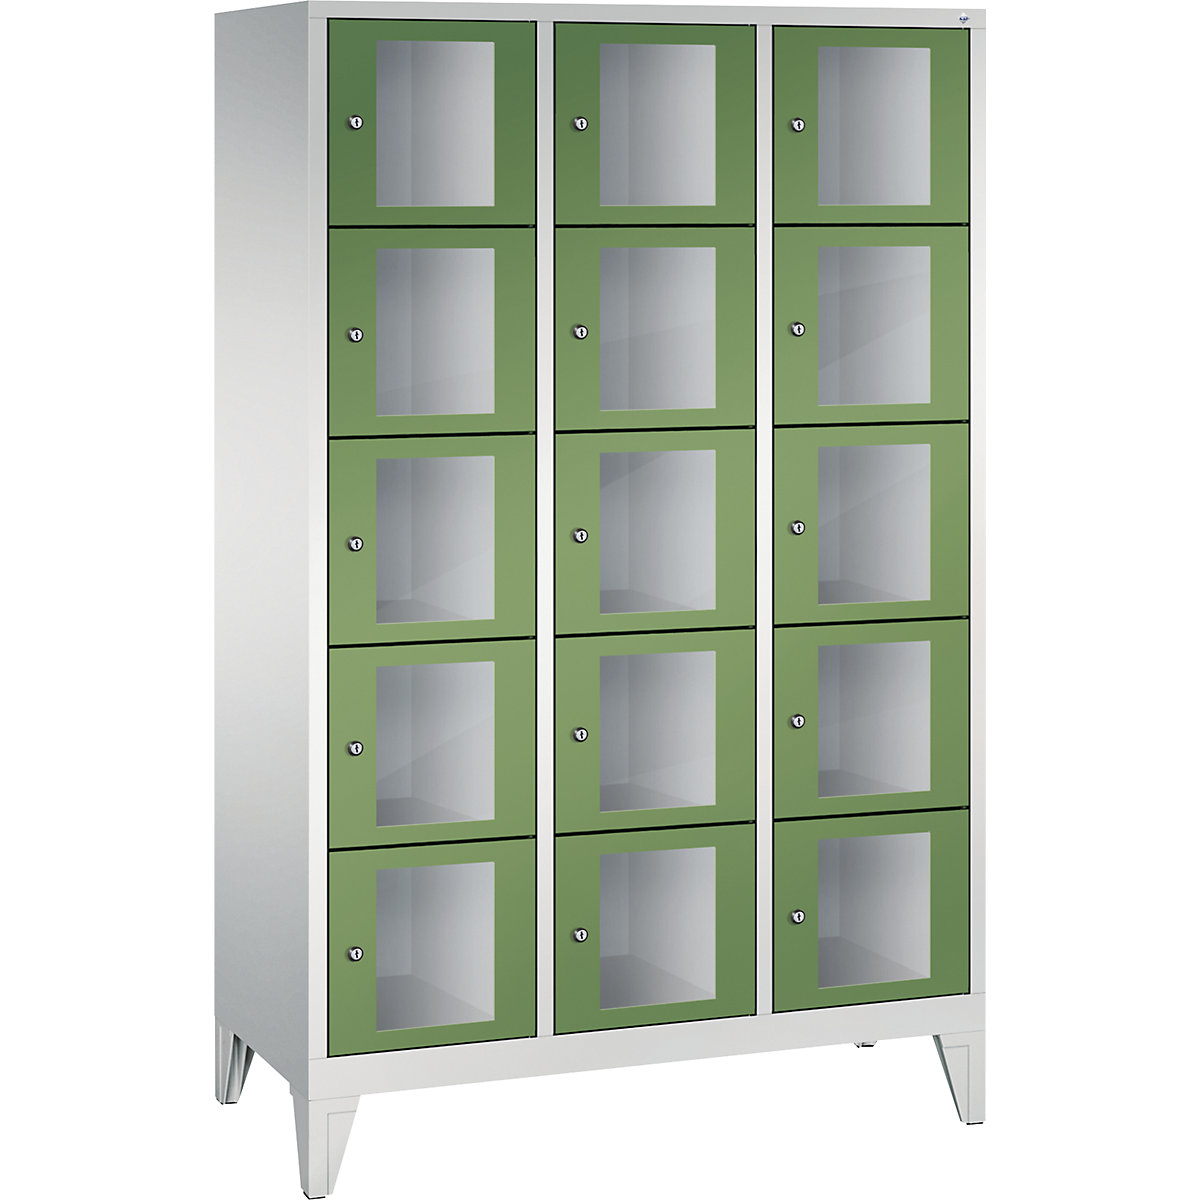 CLASSIC locker unit, compartment height 295 mm, with feet – C+P, 15 compartments, width 1200 mm, reseda green door